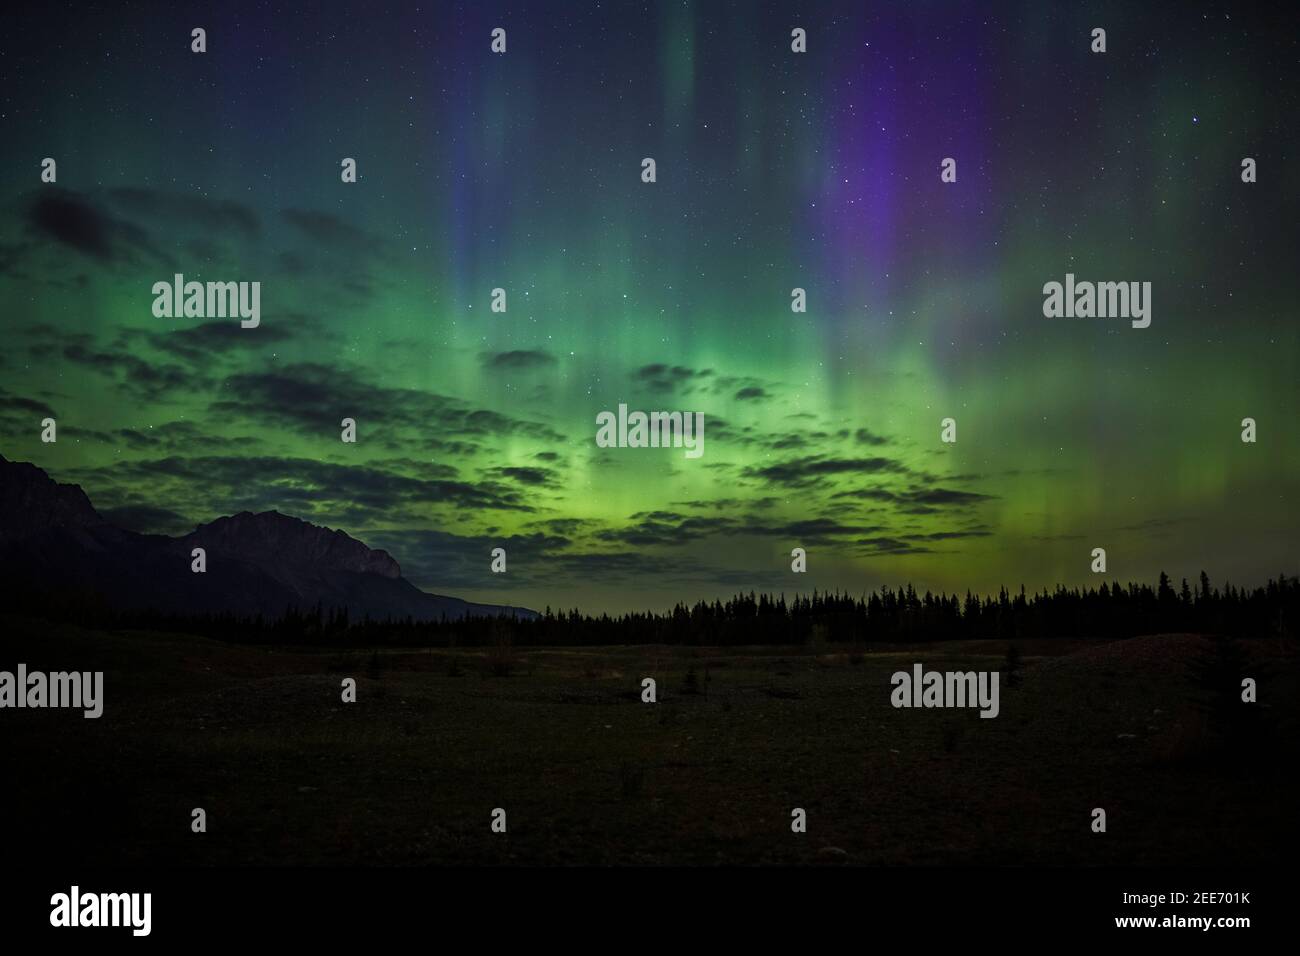 Purple and green Aurora Borealis (Northern Lights) from the Canadian Rockies during a spring night Stock Photo